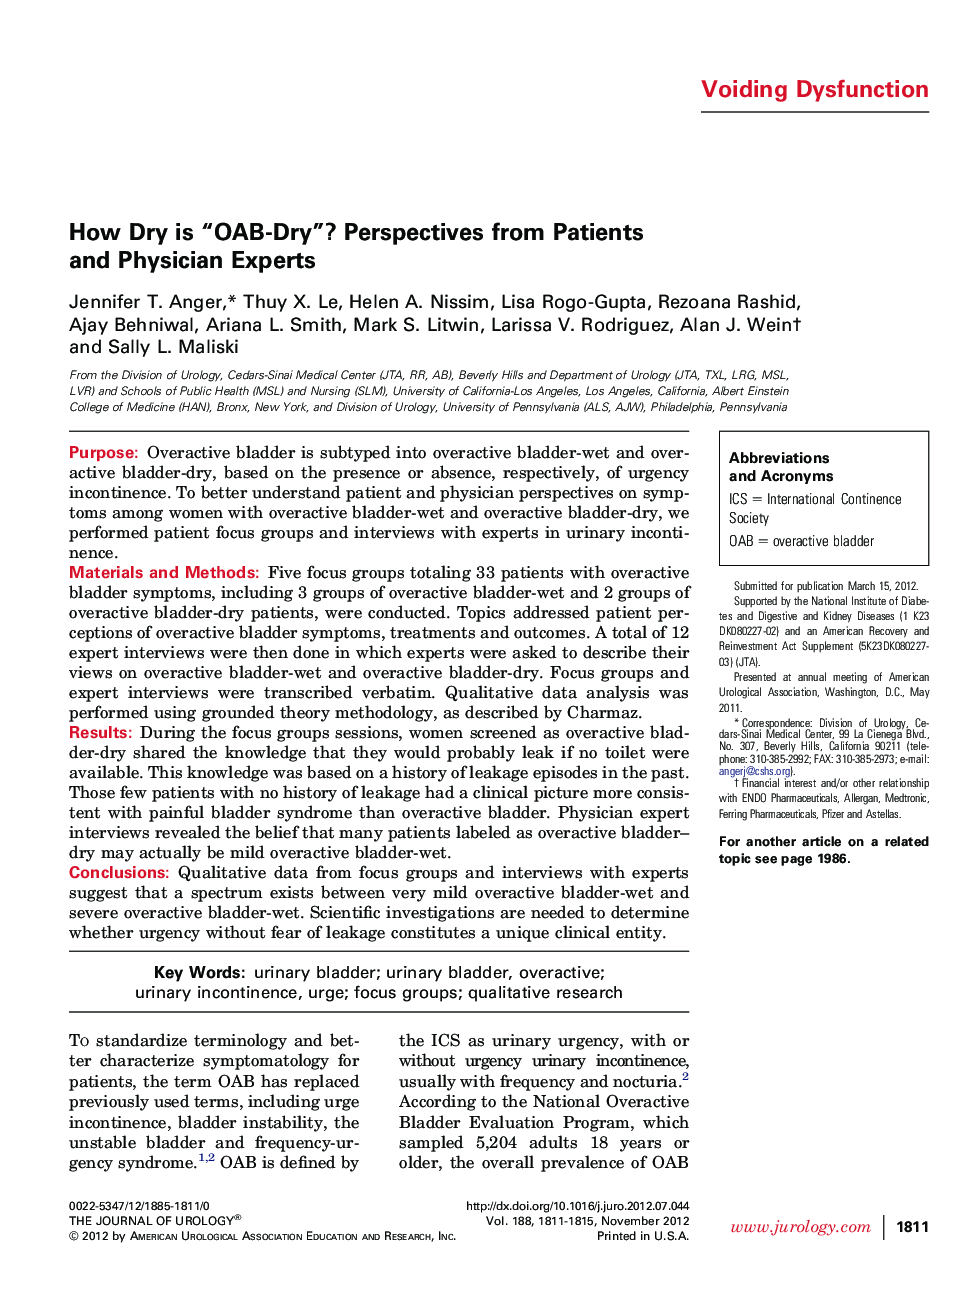 How Dry is “OAB-Dry”? Perspectives from Patients and Physician Experts 